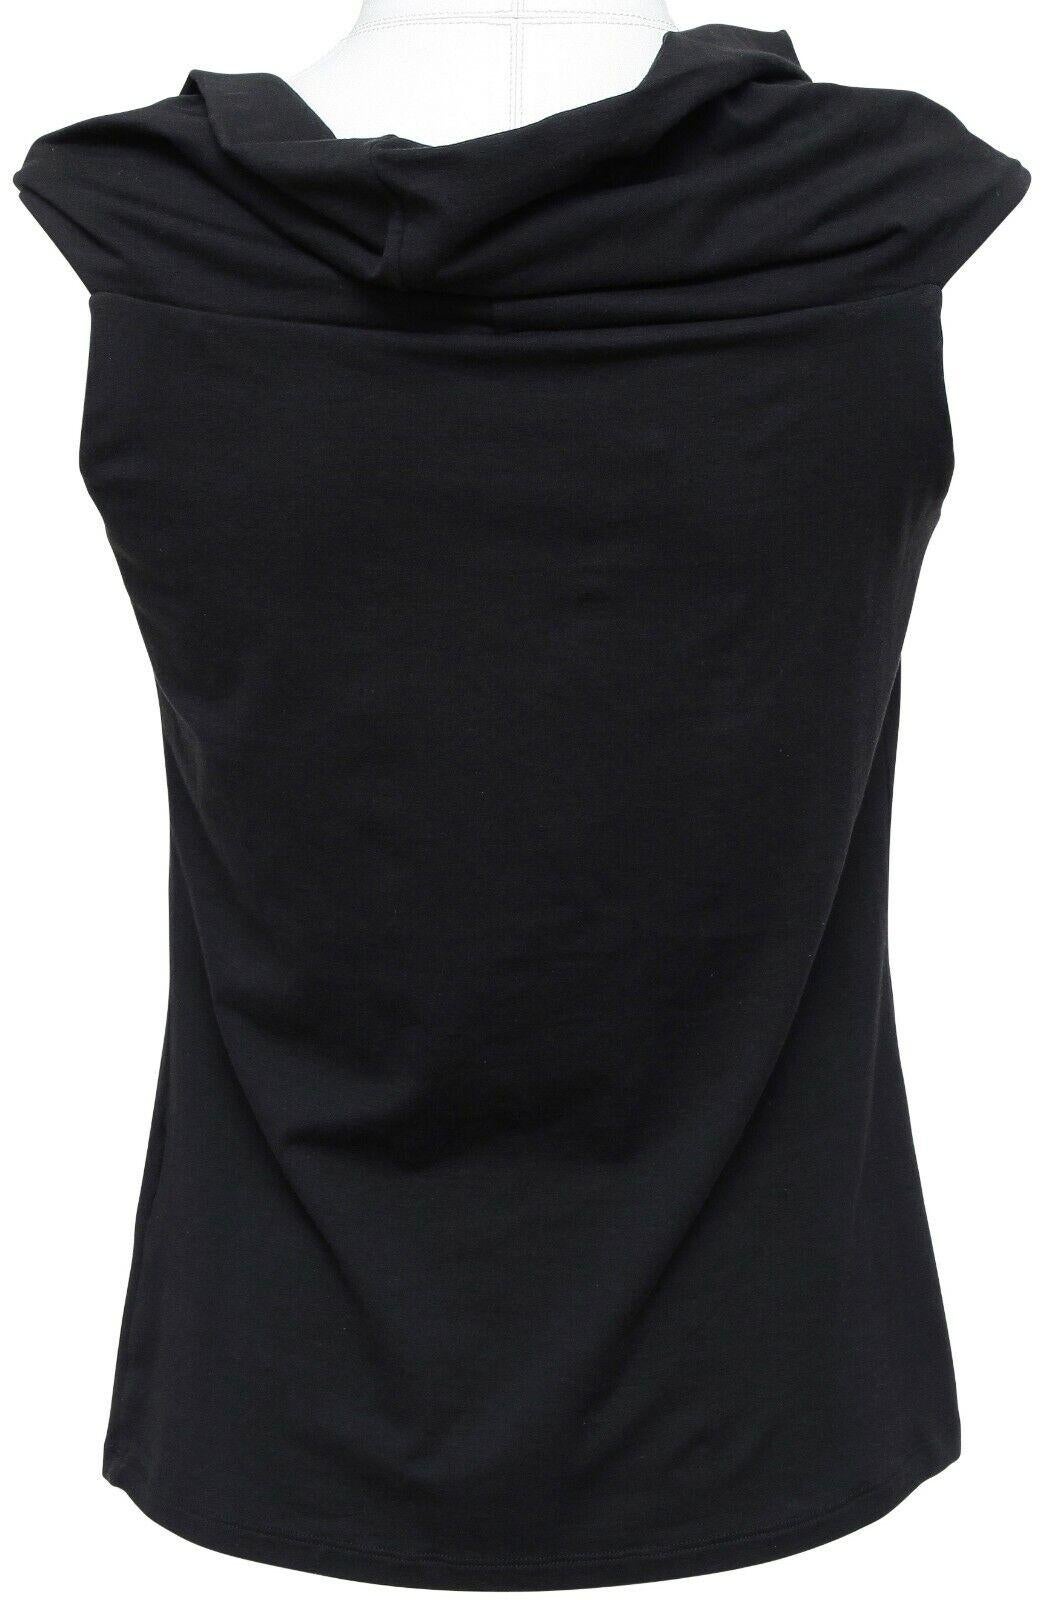 MAX MARA Black Sweater Top Shirt Blouse Cotton Spandex Pullover Sleeveless Sz M For Sale 2